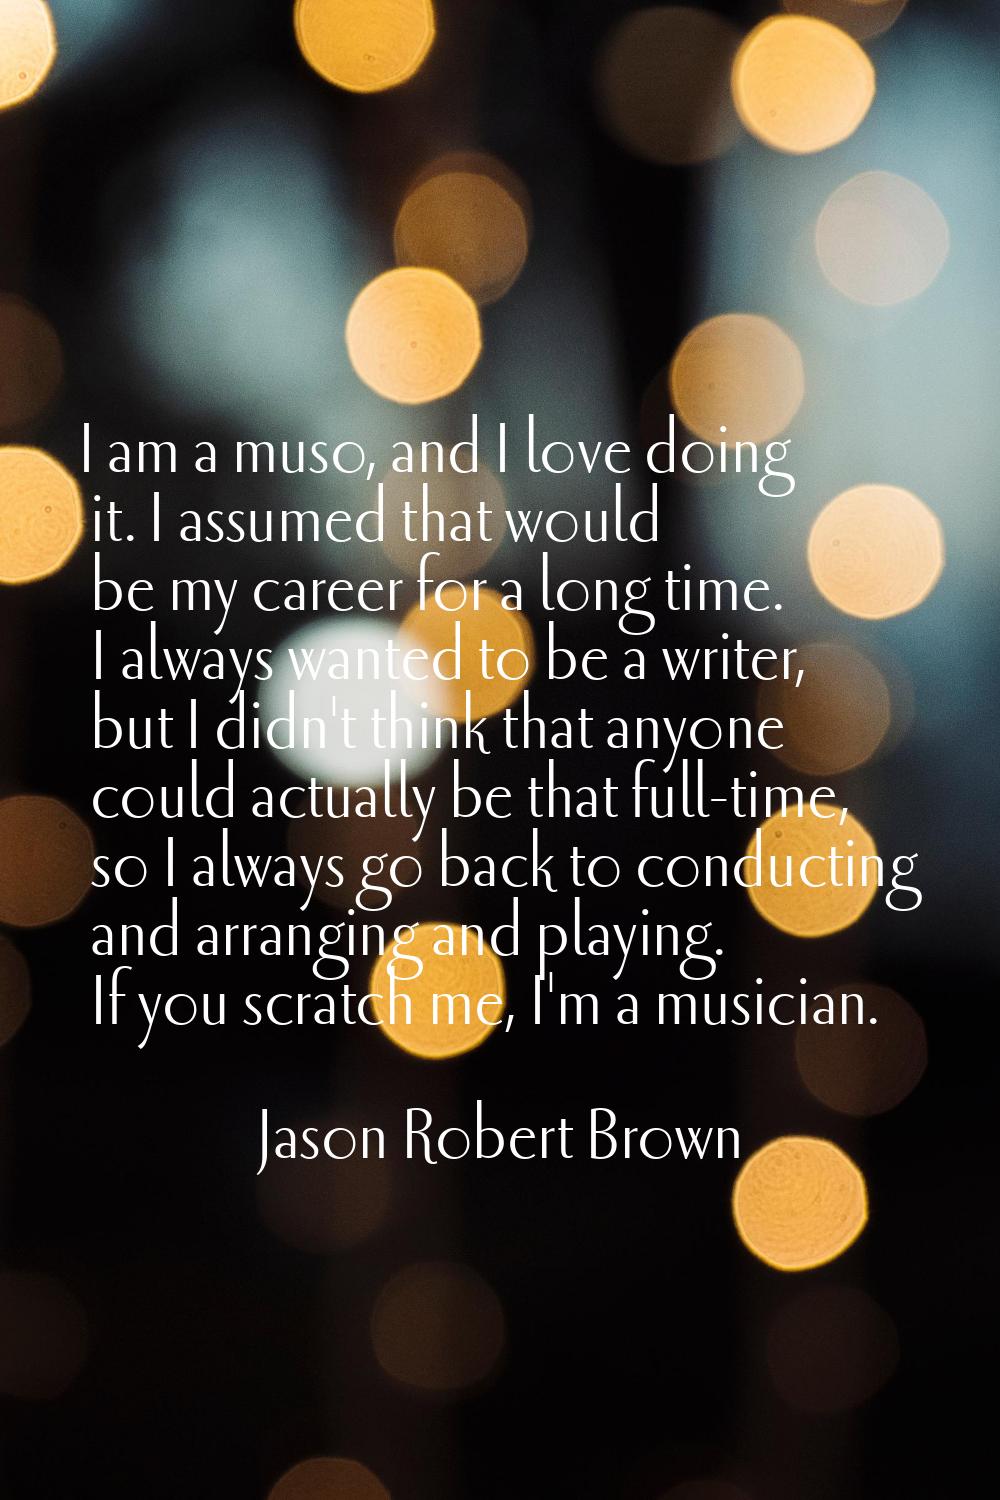 I am a muso, and I love doing it. I assumed that would be my career for a long time. I always wante